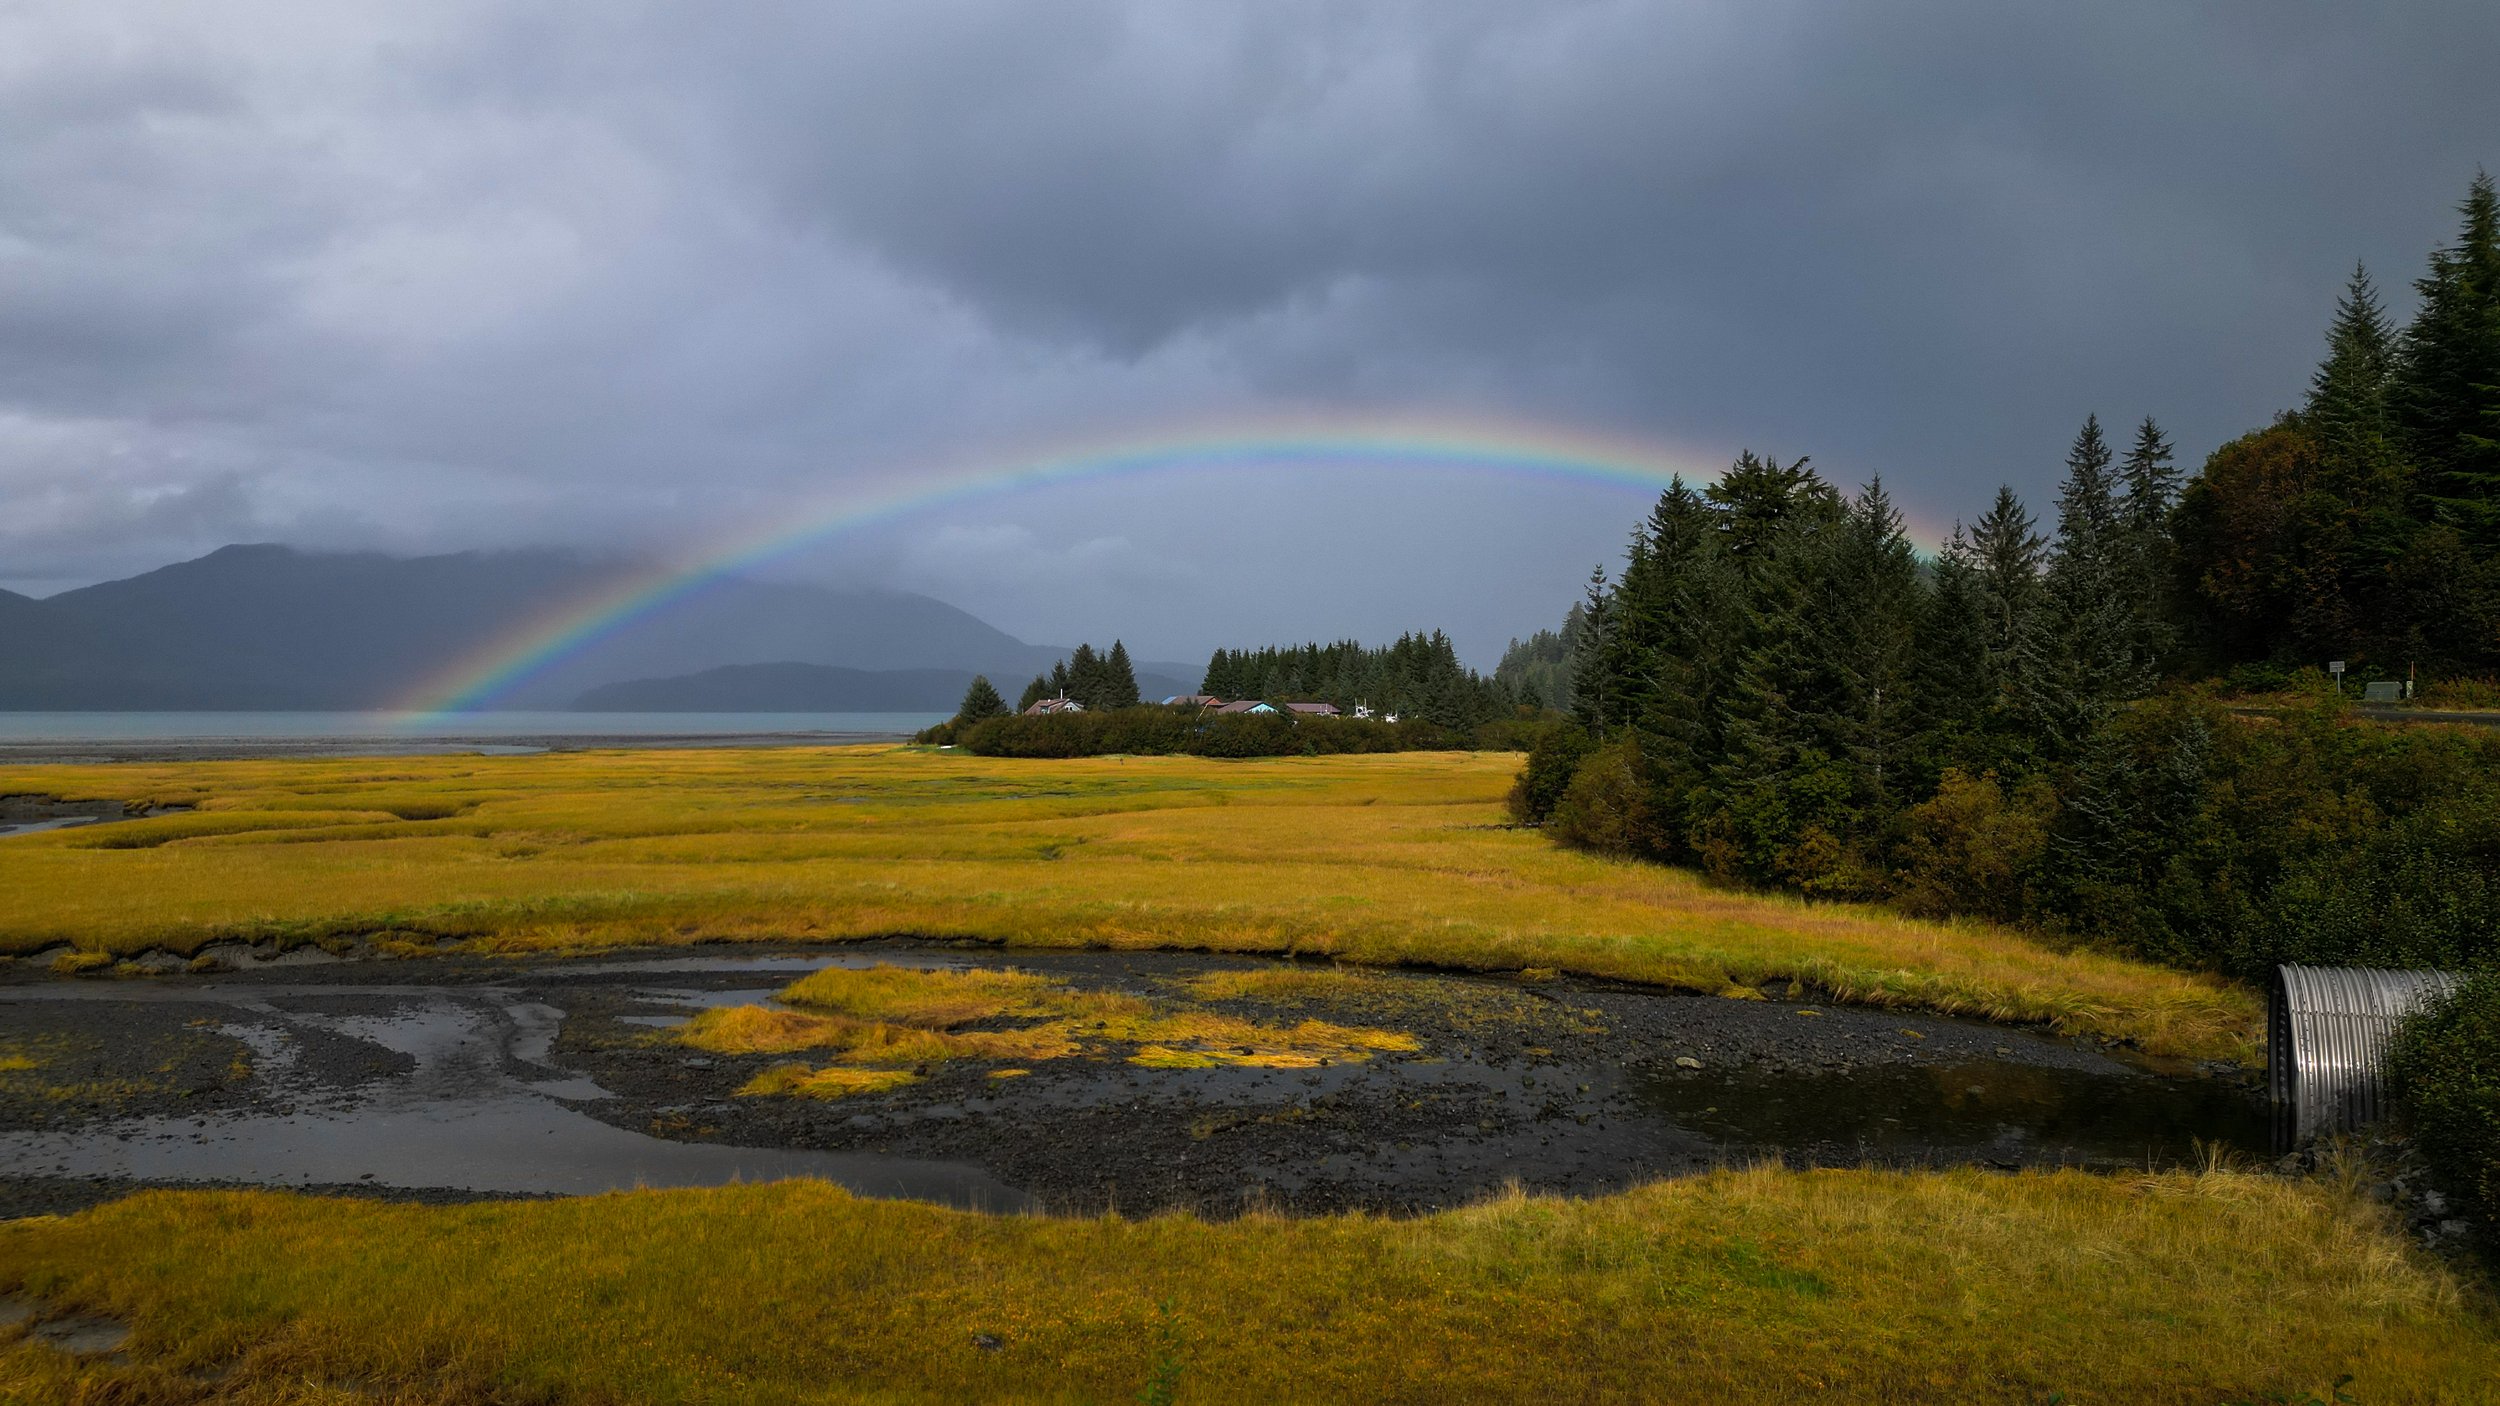 Rainbow sighting above Orca Inlet.